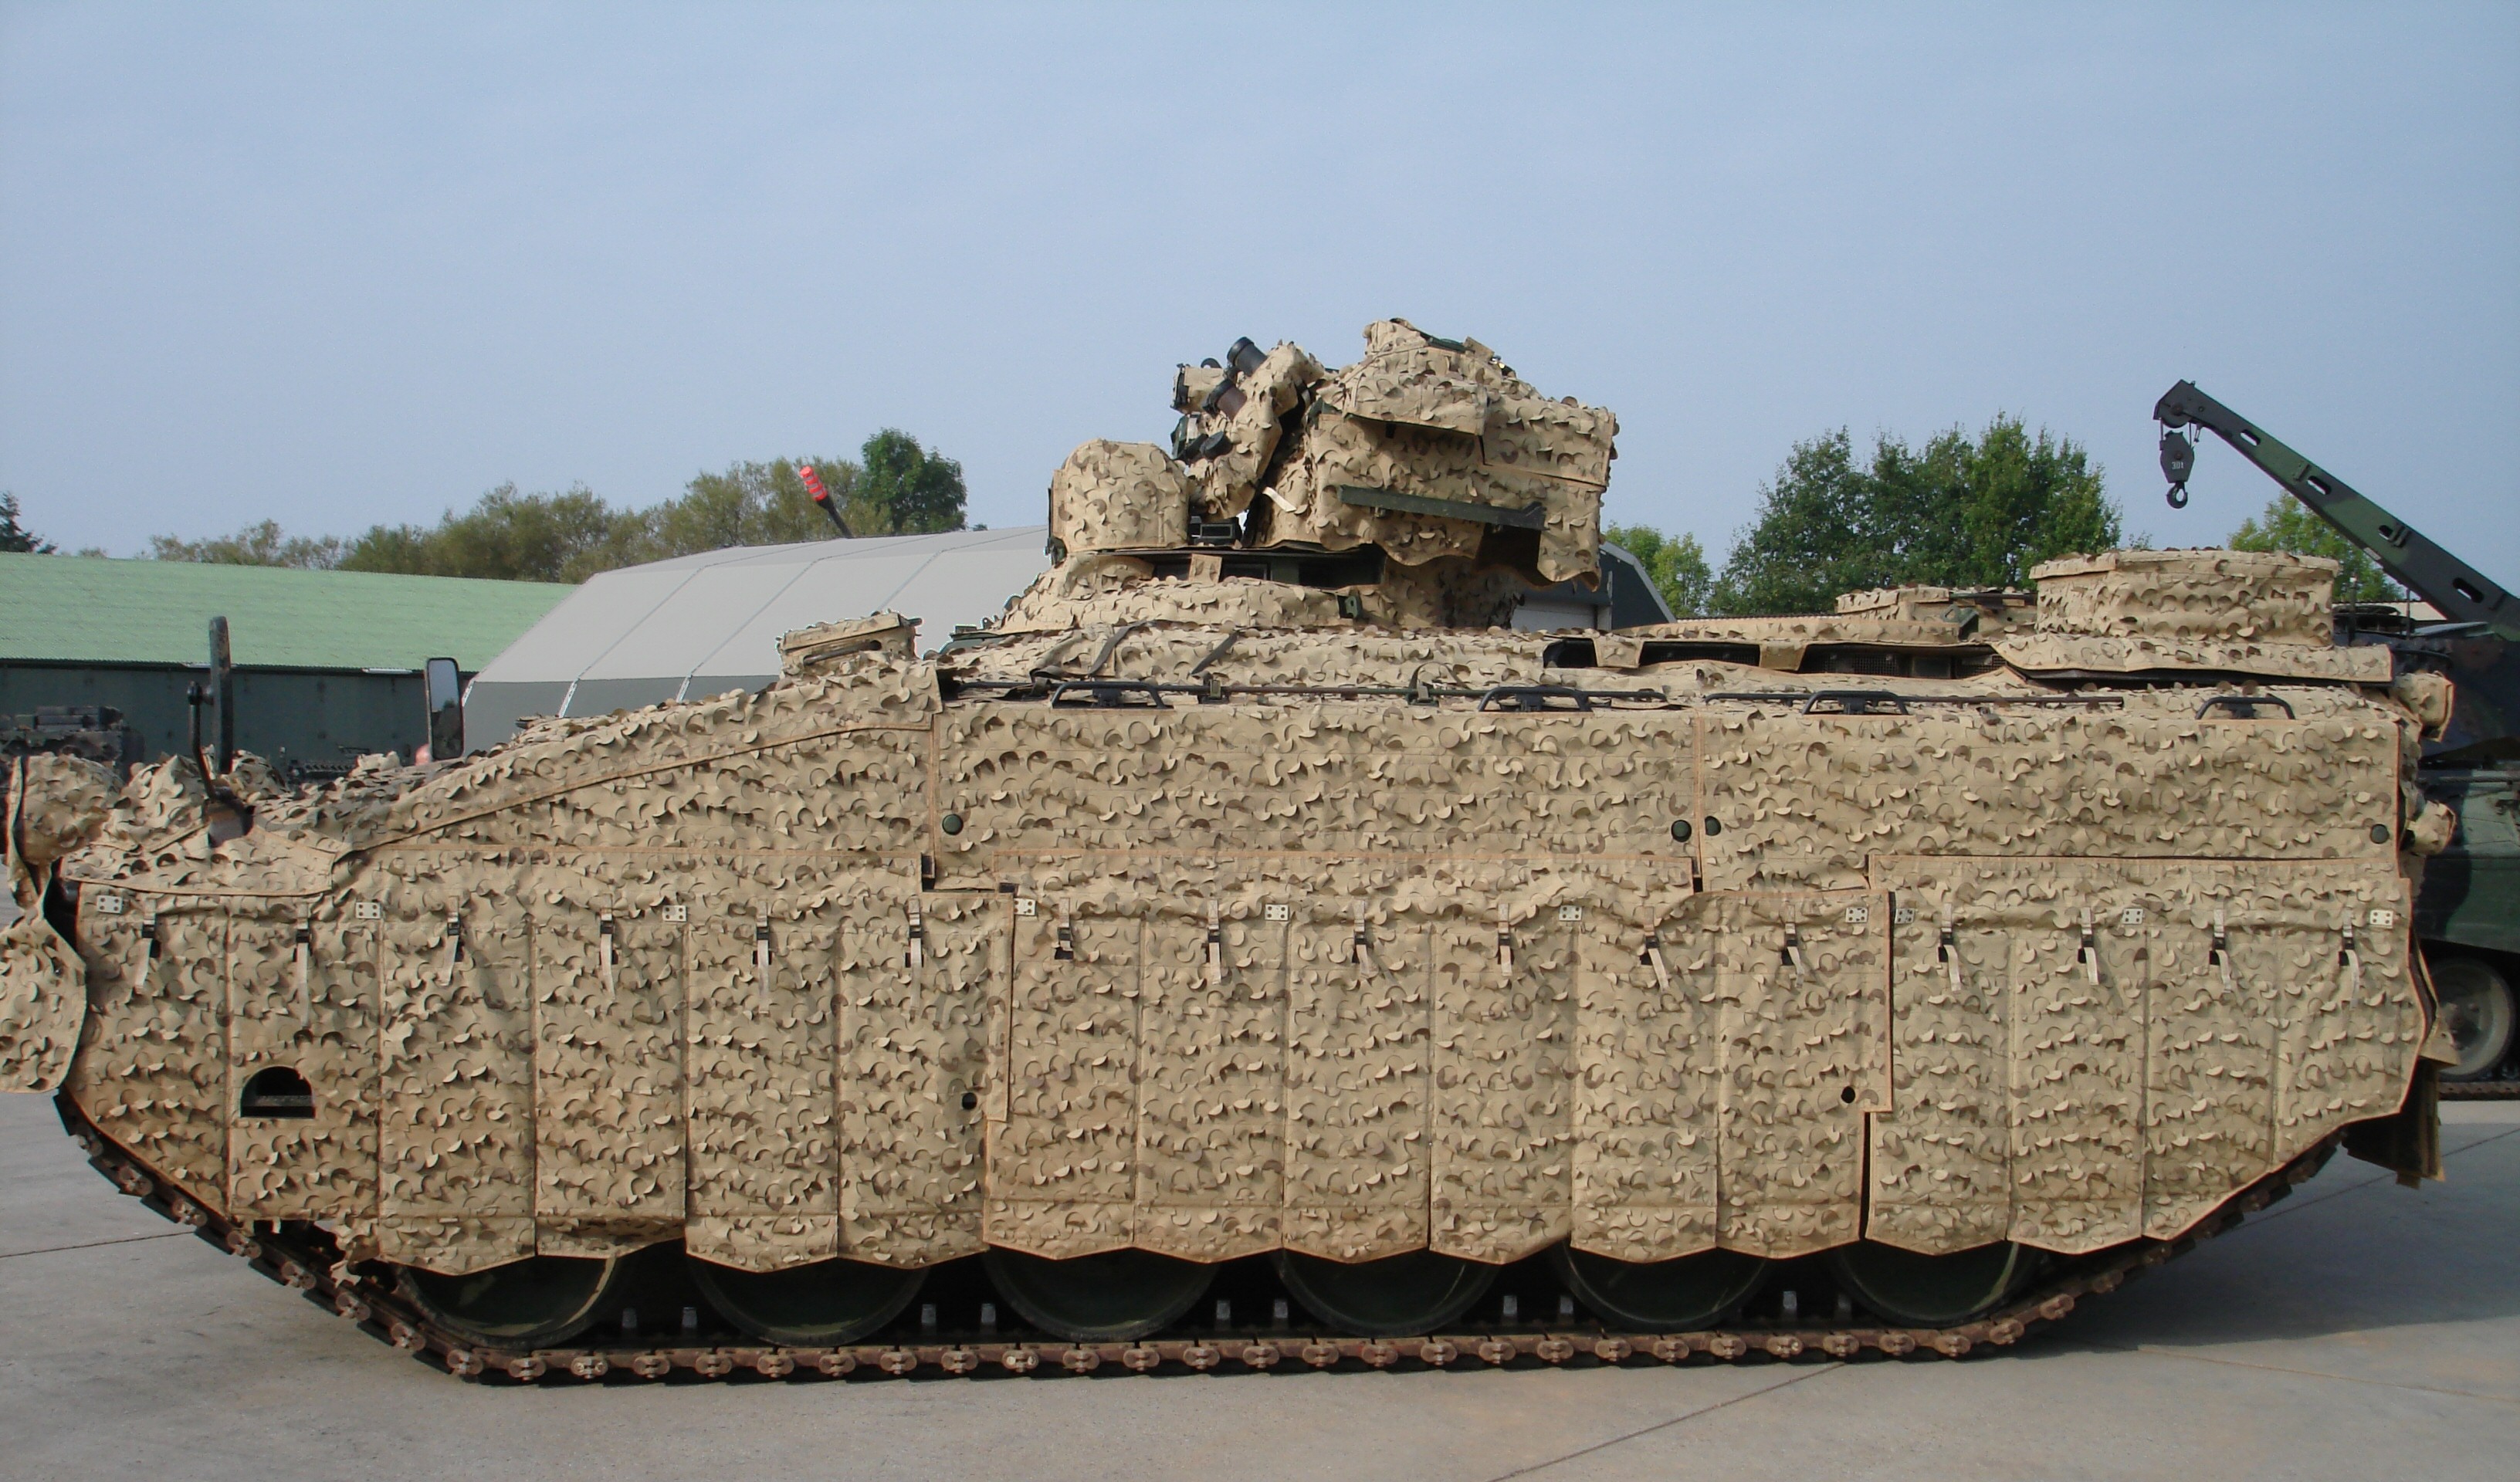 Marder_1A5_Mobile_Camouflage_System_Barracuda.jpg